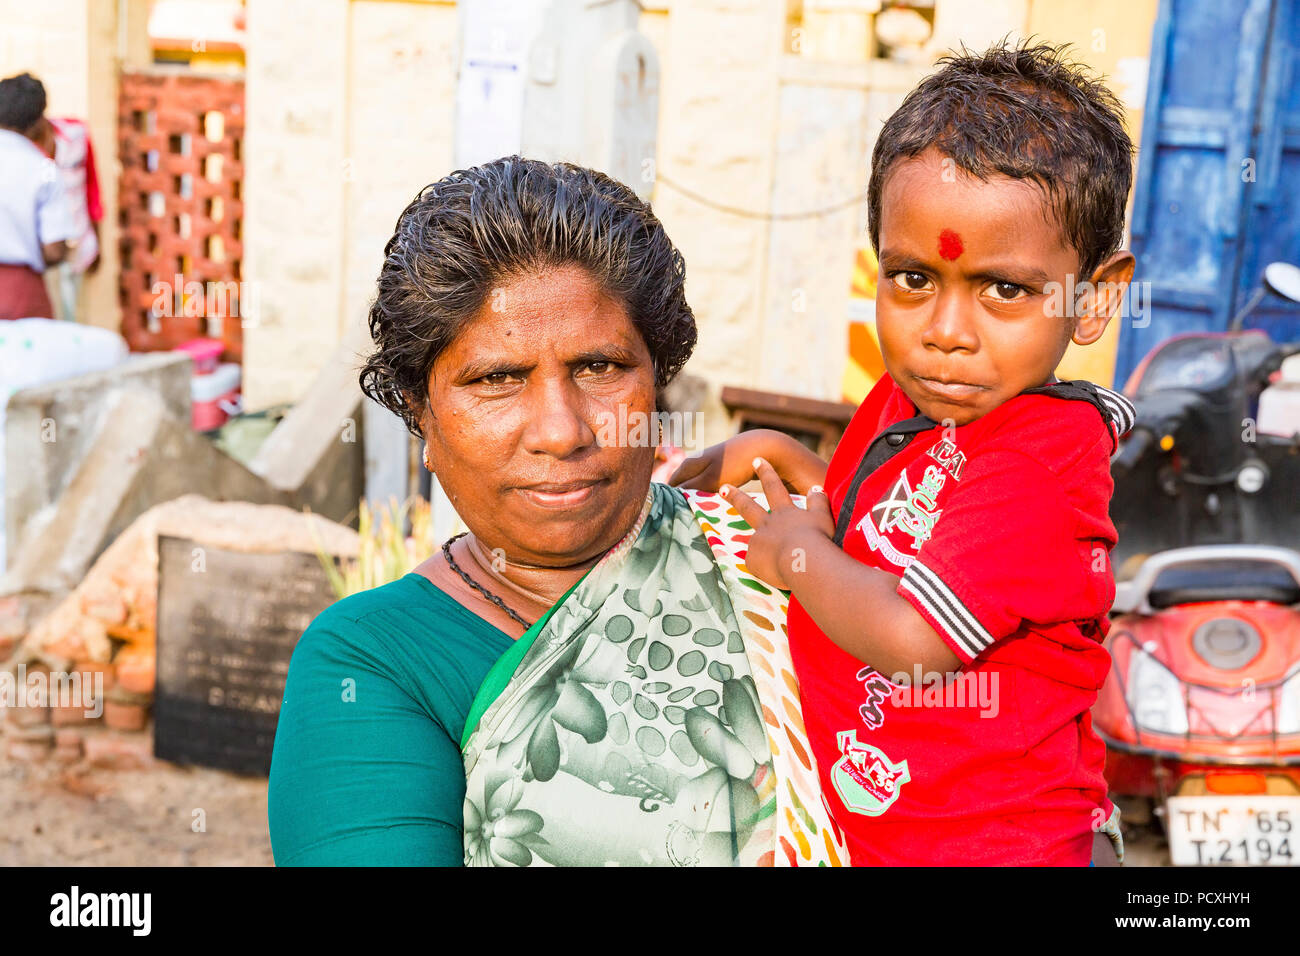 RAMESHWARAM, TAMIL NADU, INDIA - MARCH CIRCA, 2018. Smiling indian child in the arms of her mother. Amritsar, Punjab, India, Asia. Stock Photo